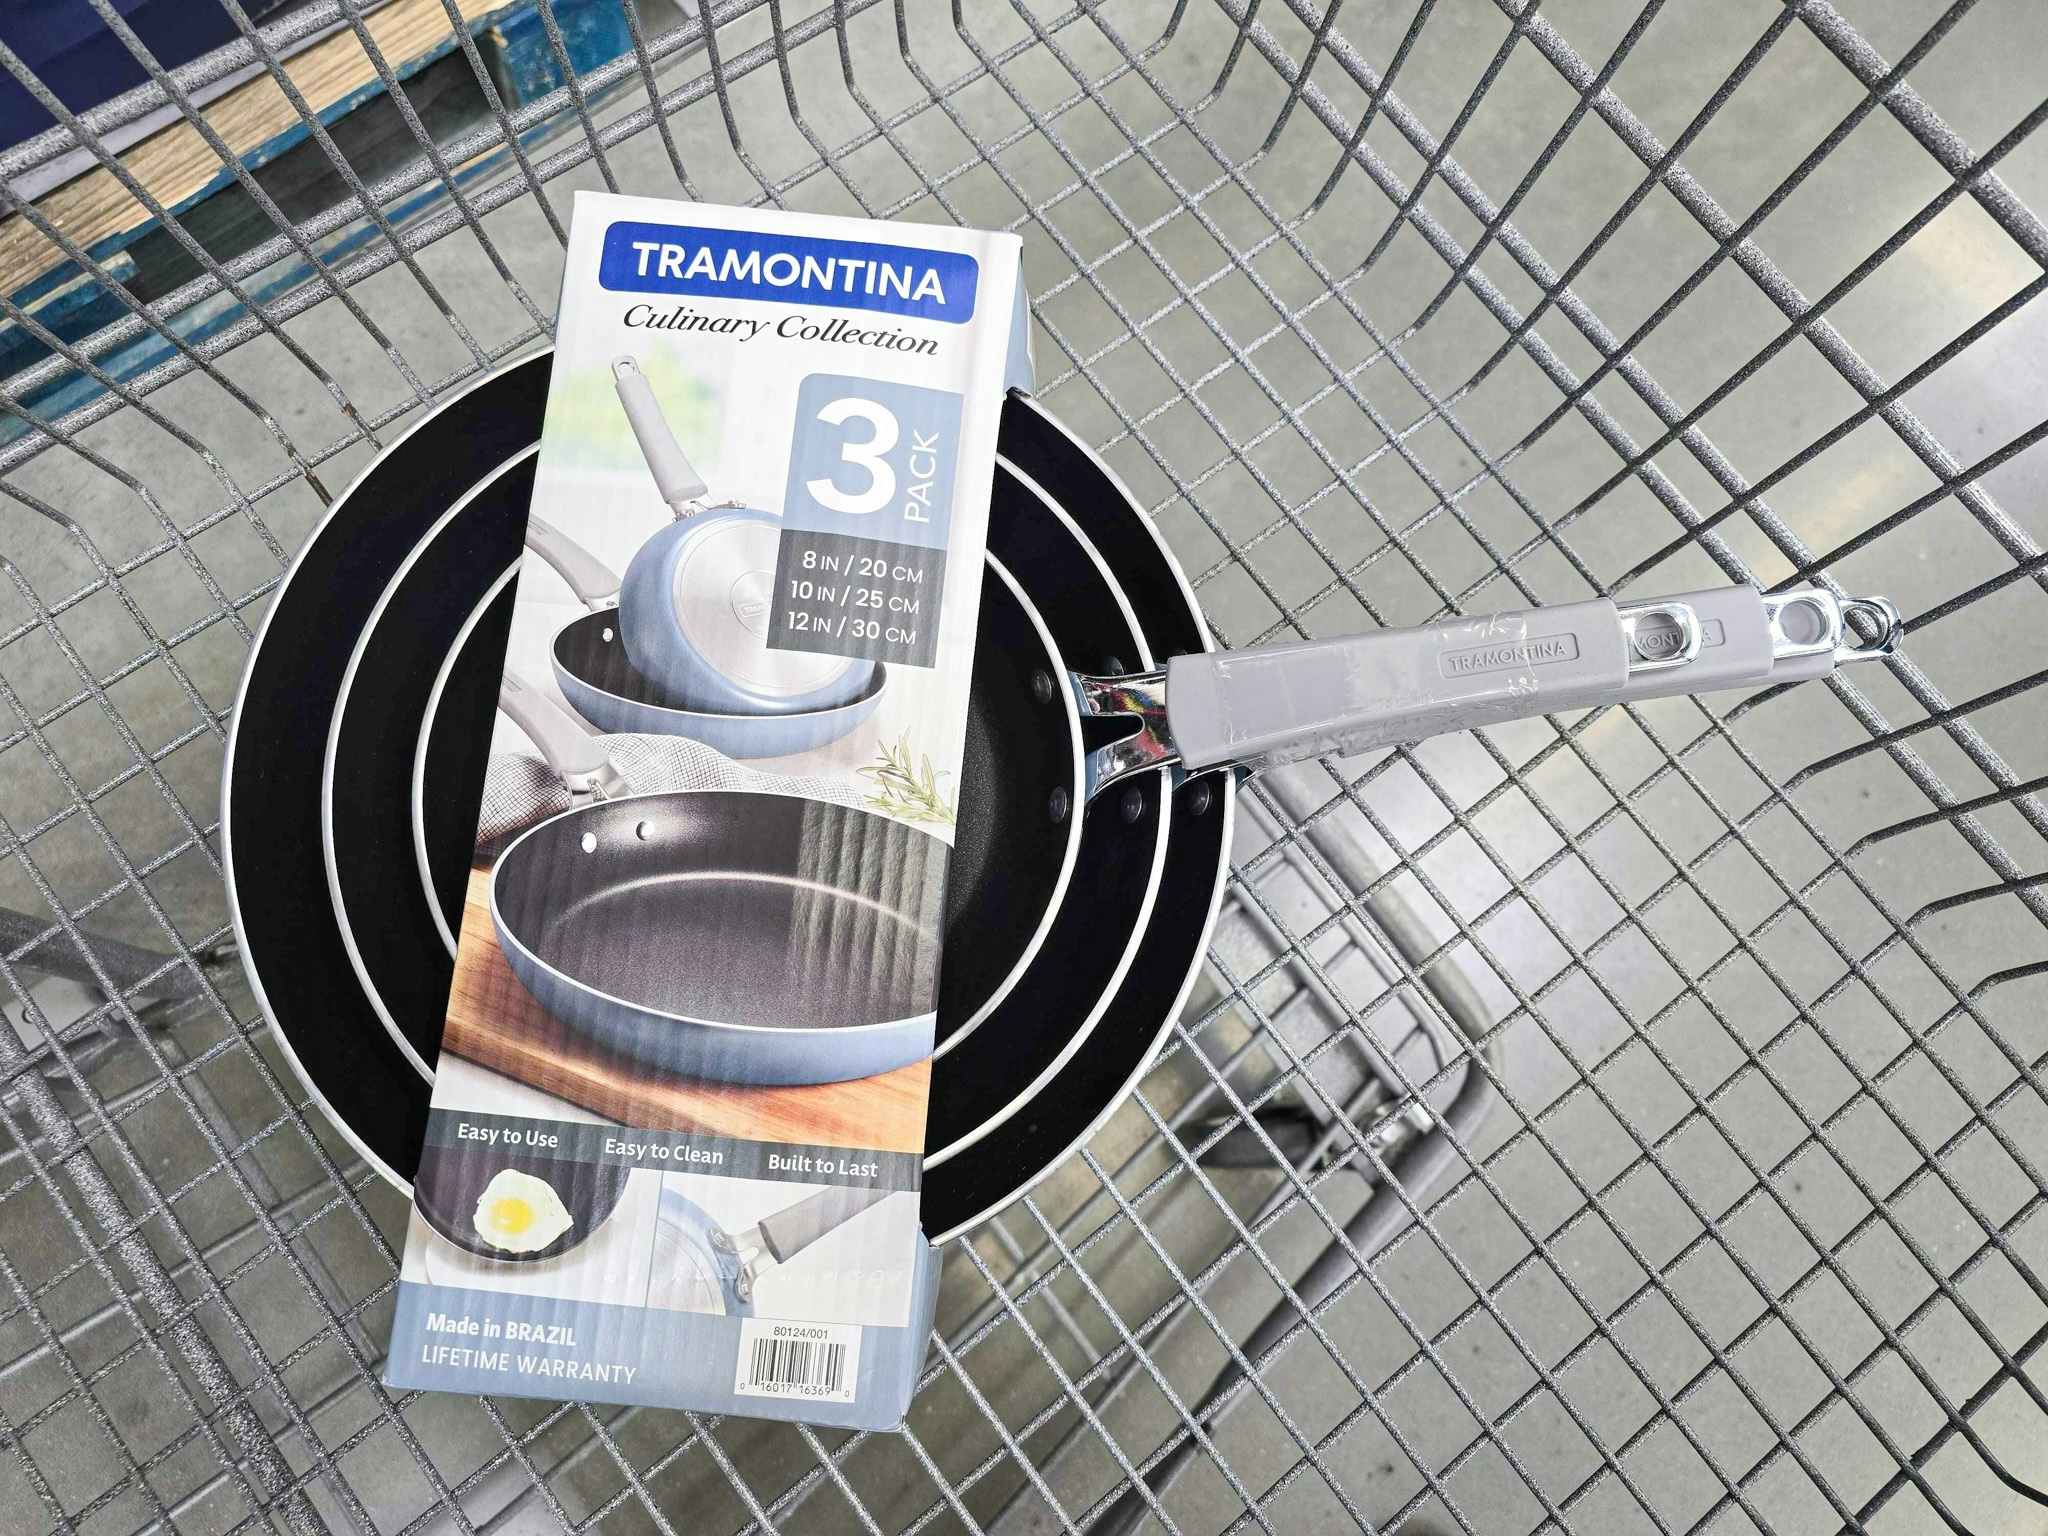 3-pack of tramontina frying pans in a cart